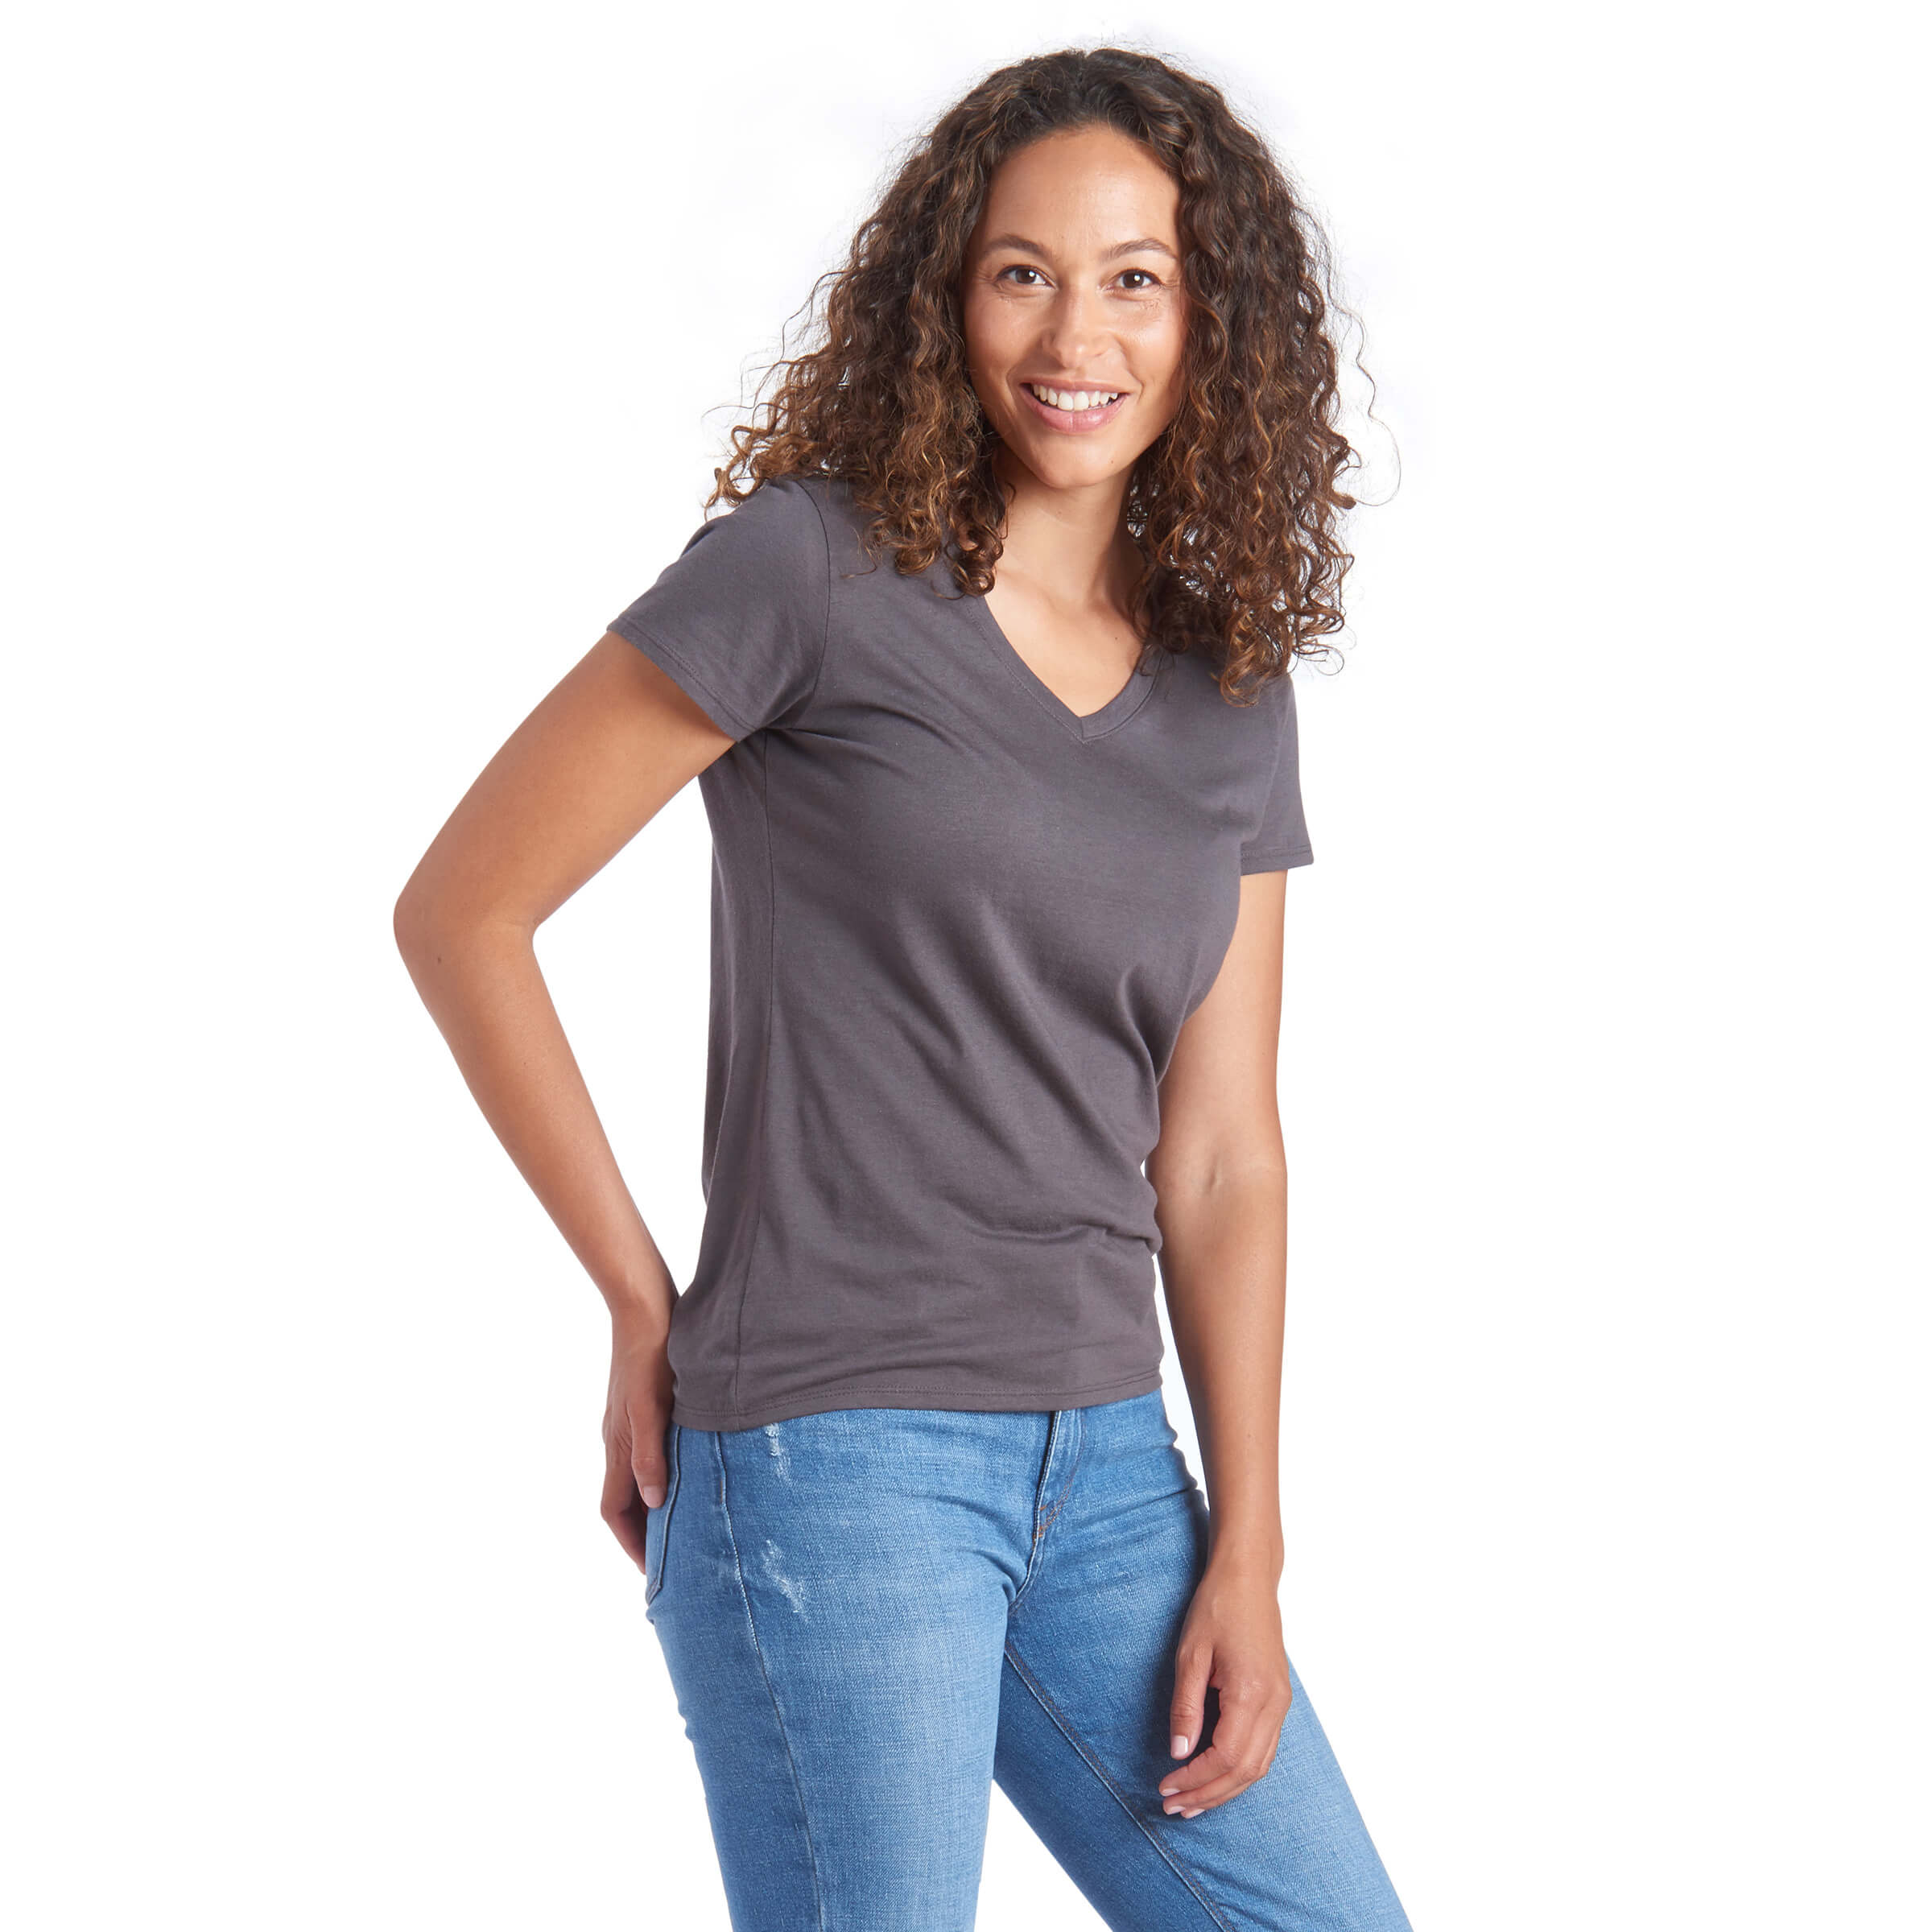 Women wearing Noche gris Fitted V-Neck Marcy Tee